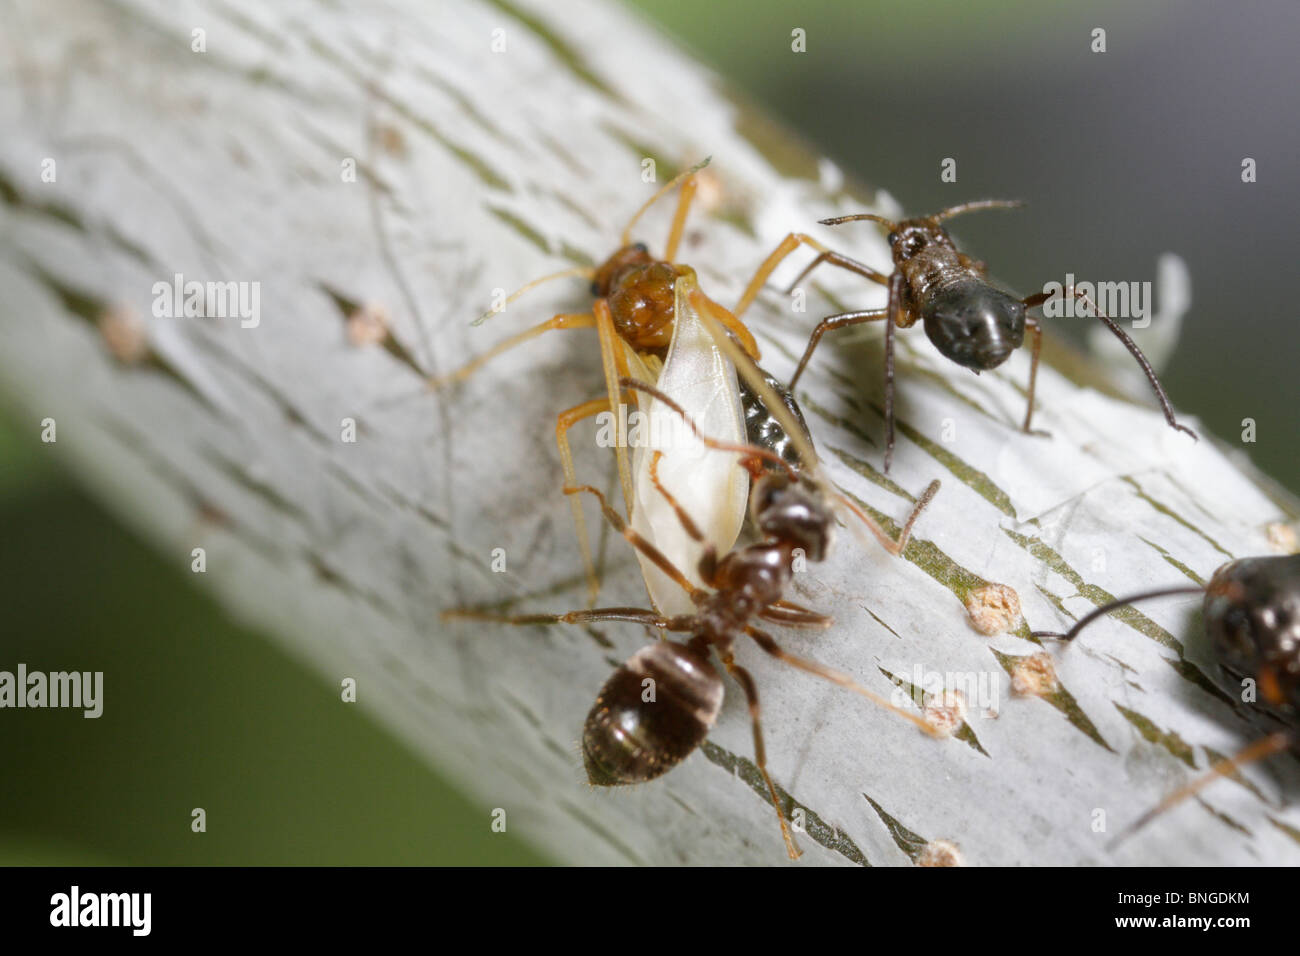 Lachnus roboris, an aphid, shedding its skin and becoming an alate (with wings). A Lasius niger ant is nearby Stock Photo